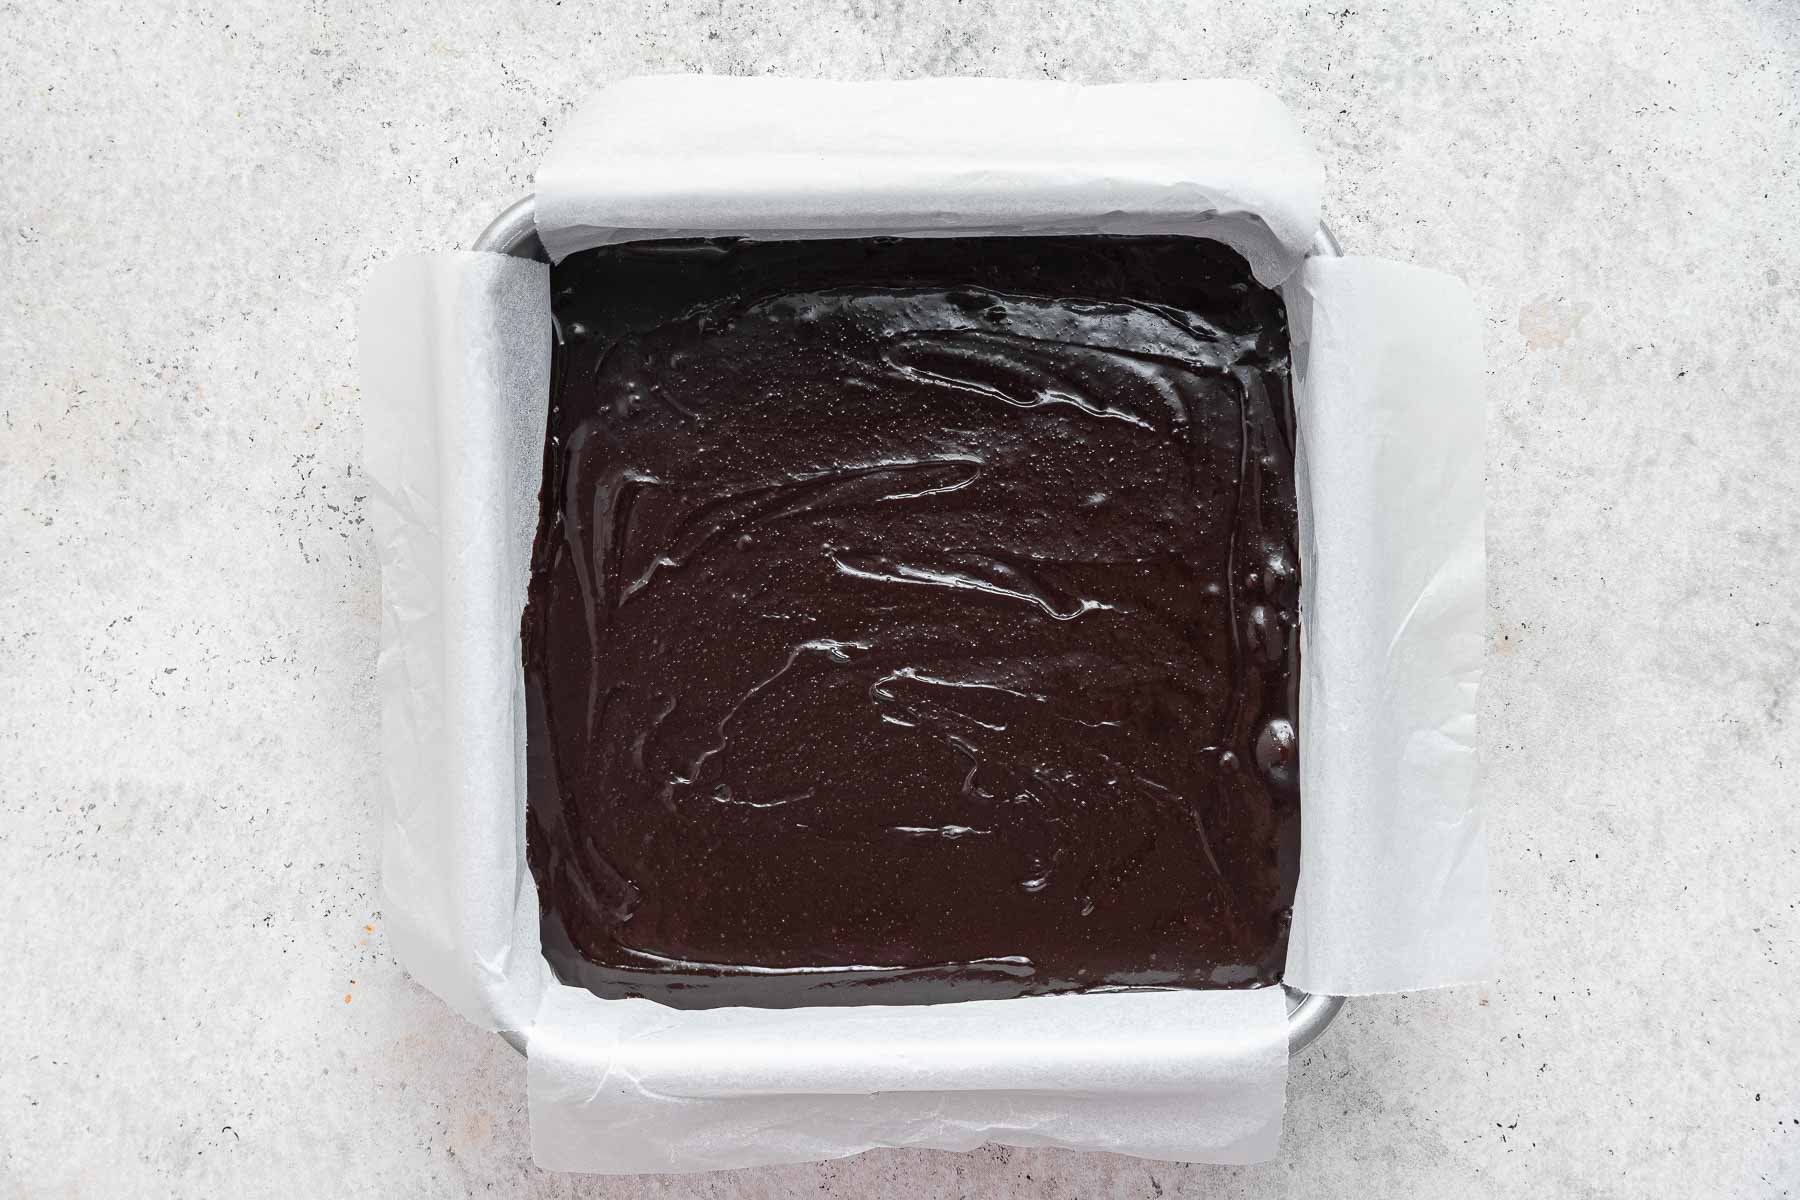 Dark brown brownie batter spread in an 8 inch square pan lined with parchment paper.